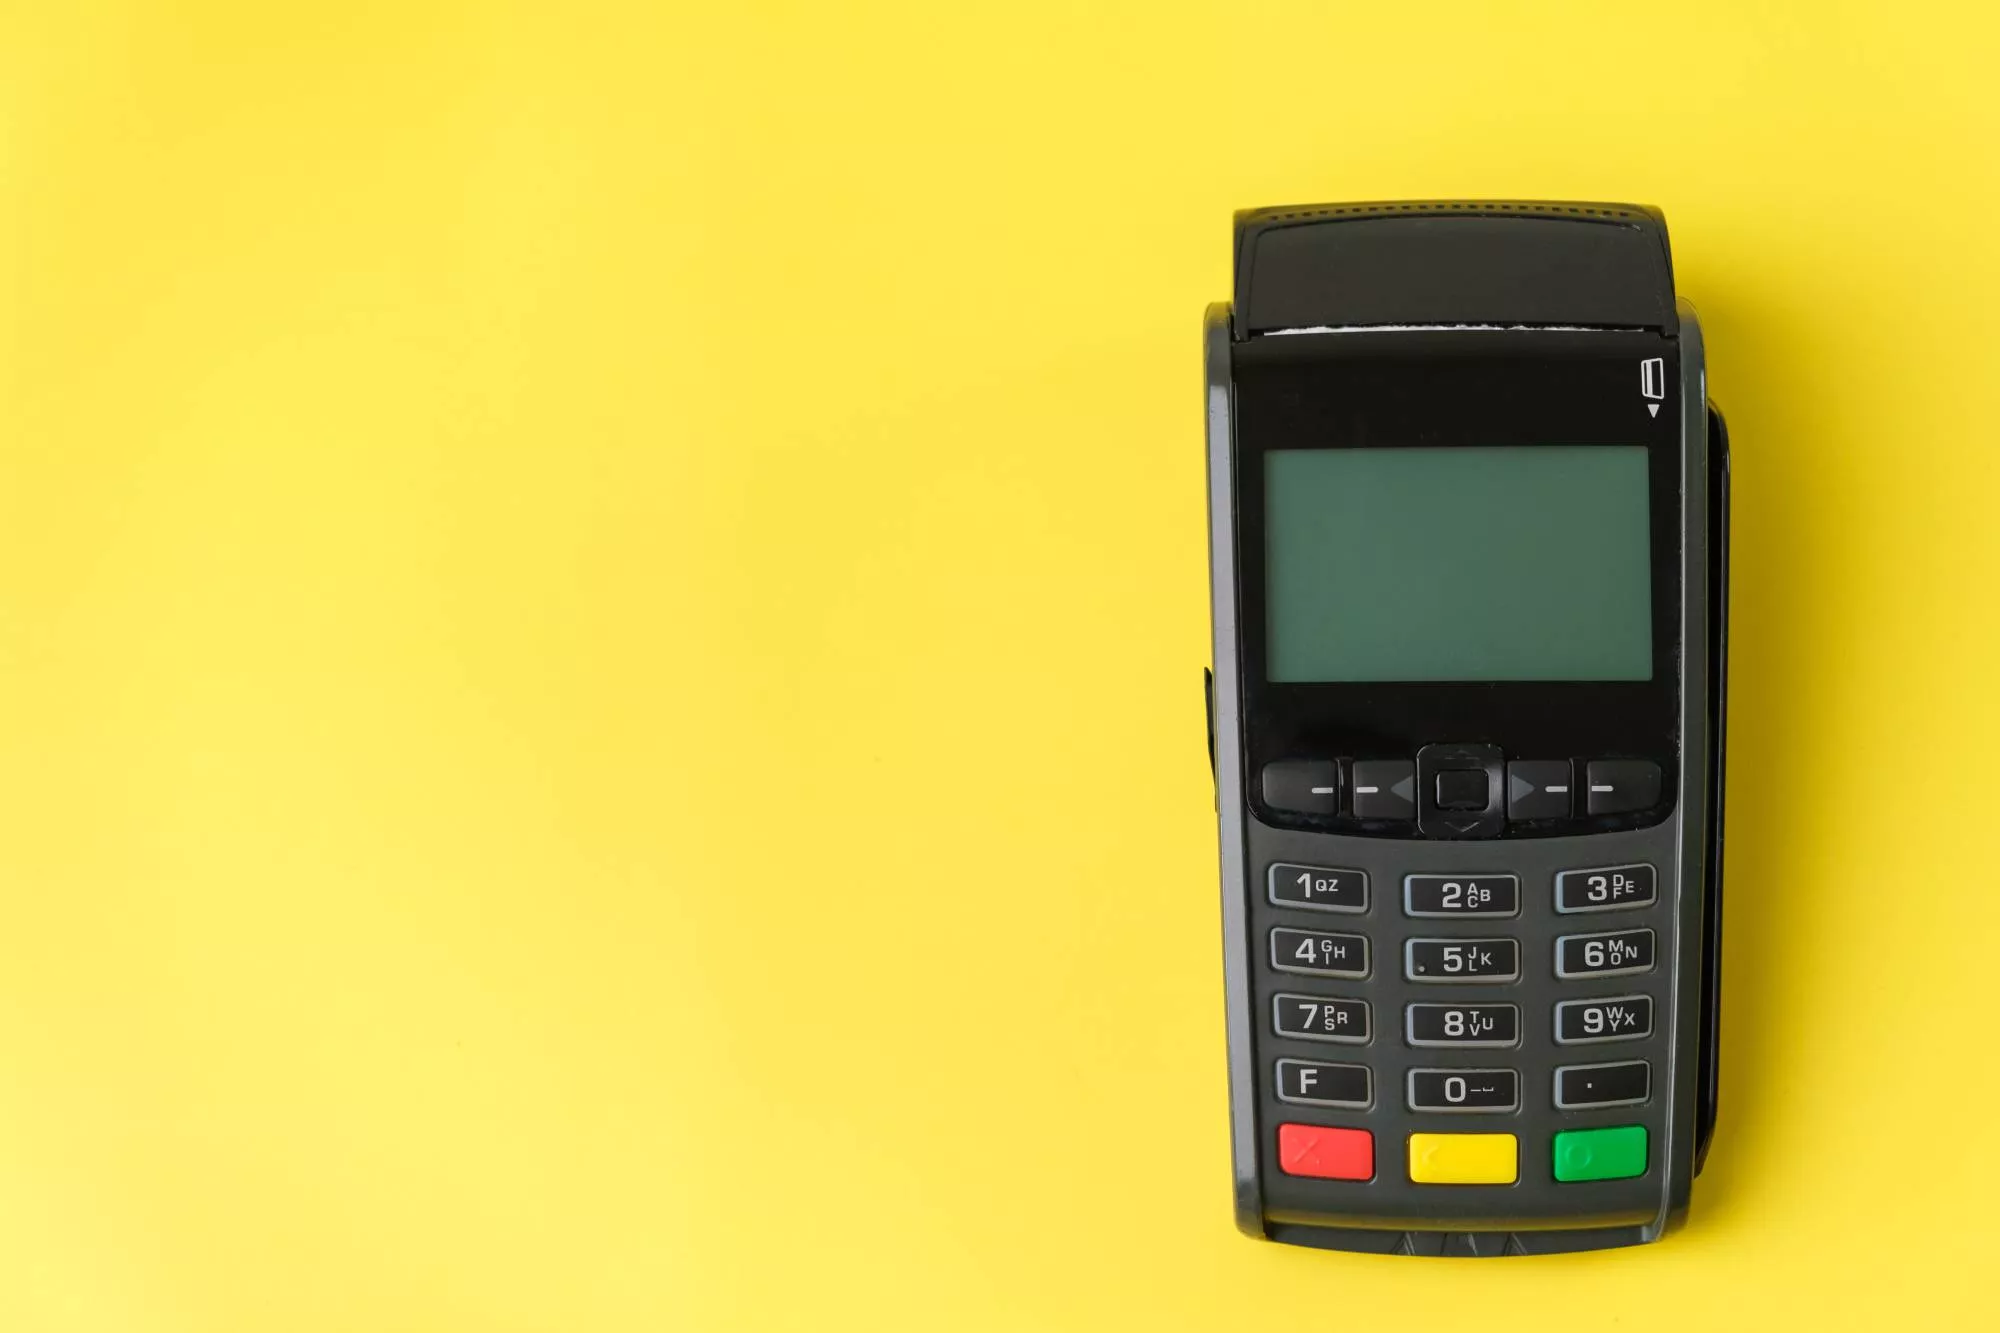 credit card reader against yellow background